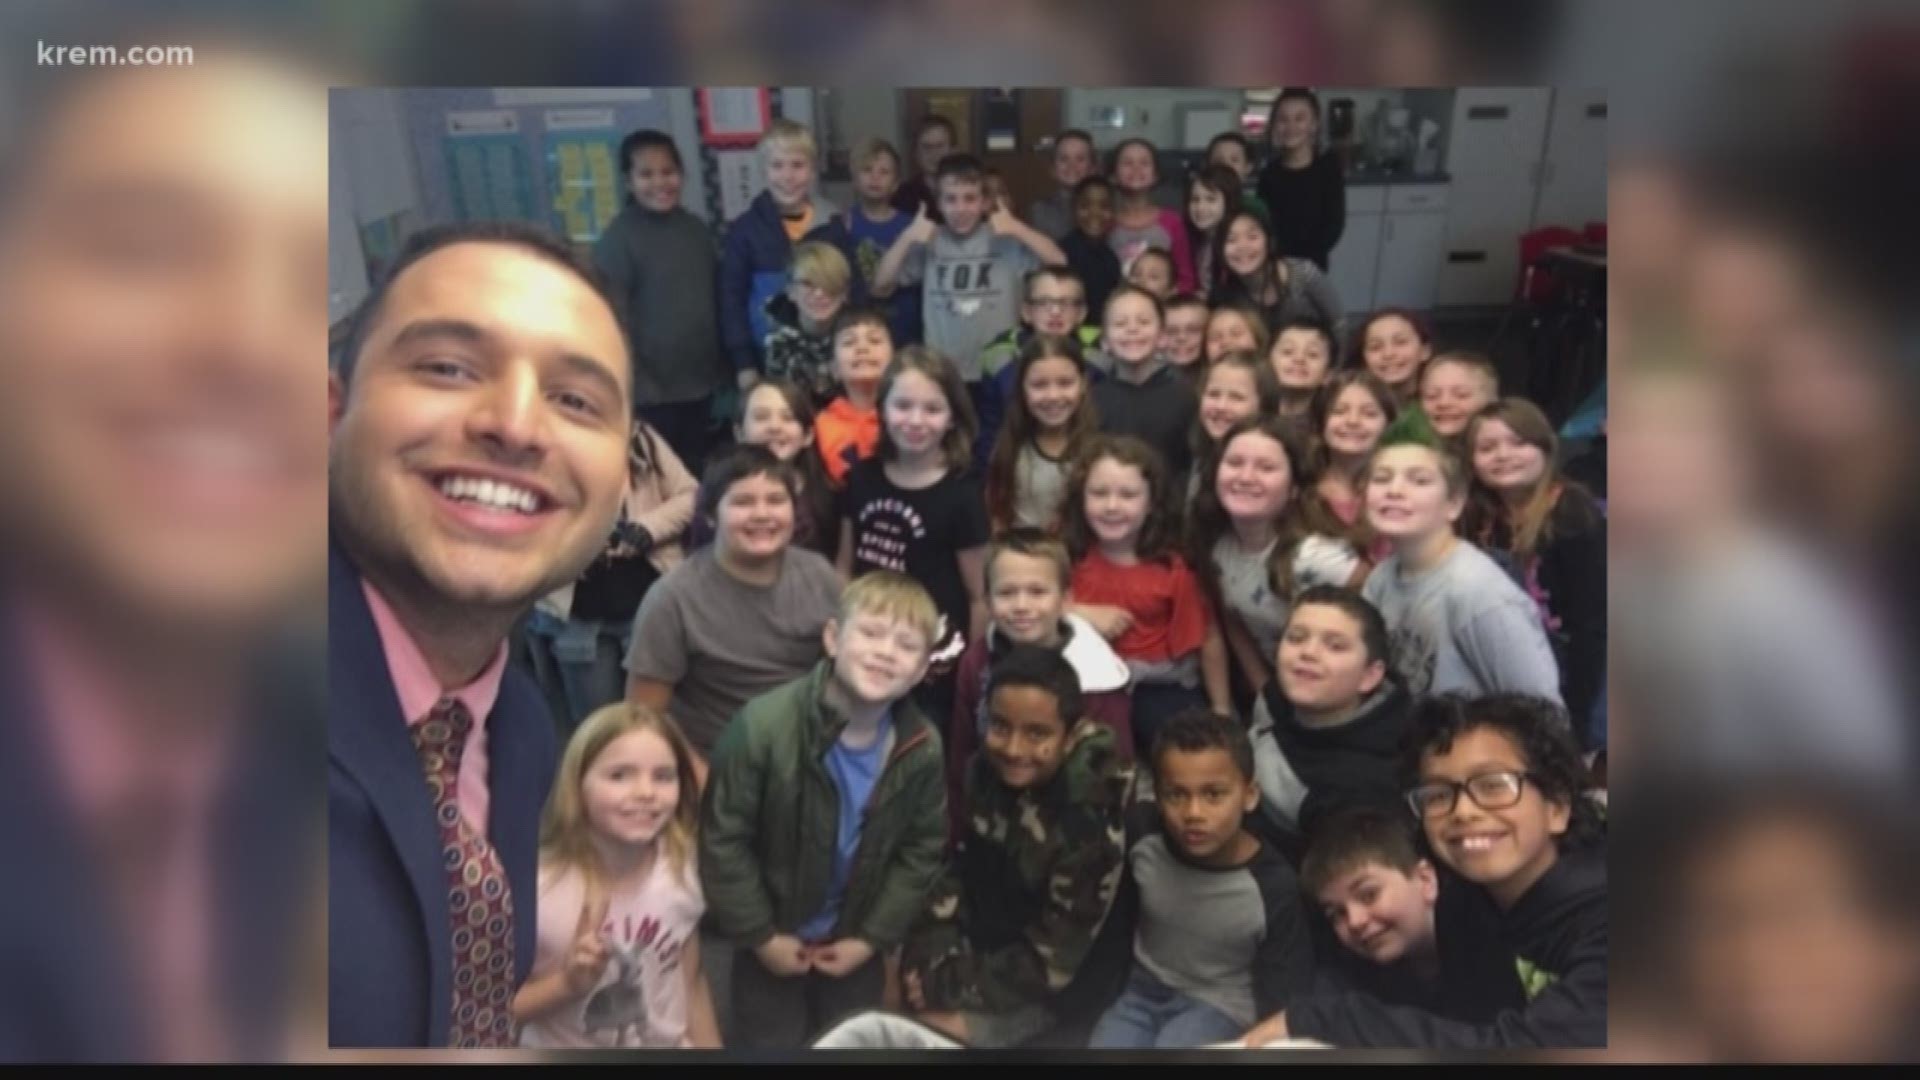 What's your favorite Thanksgiving dish? KREM's Evan Noorani asked students at McDonald Elementary School in Spokane Valley during a classroom visit.